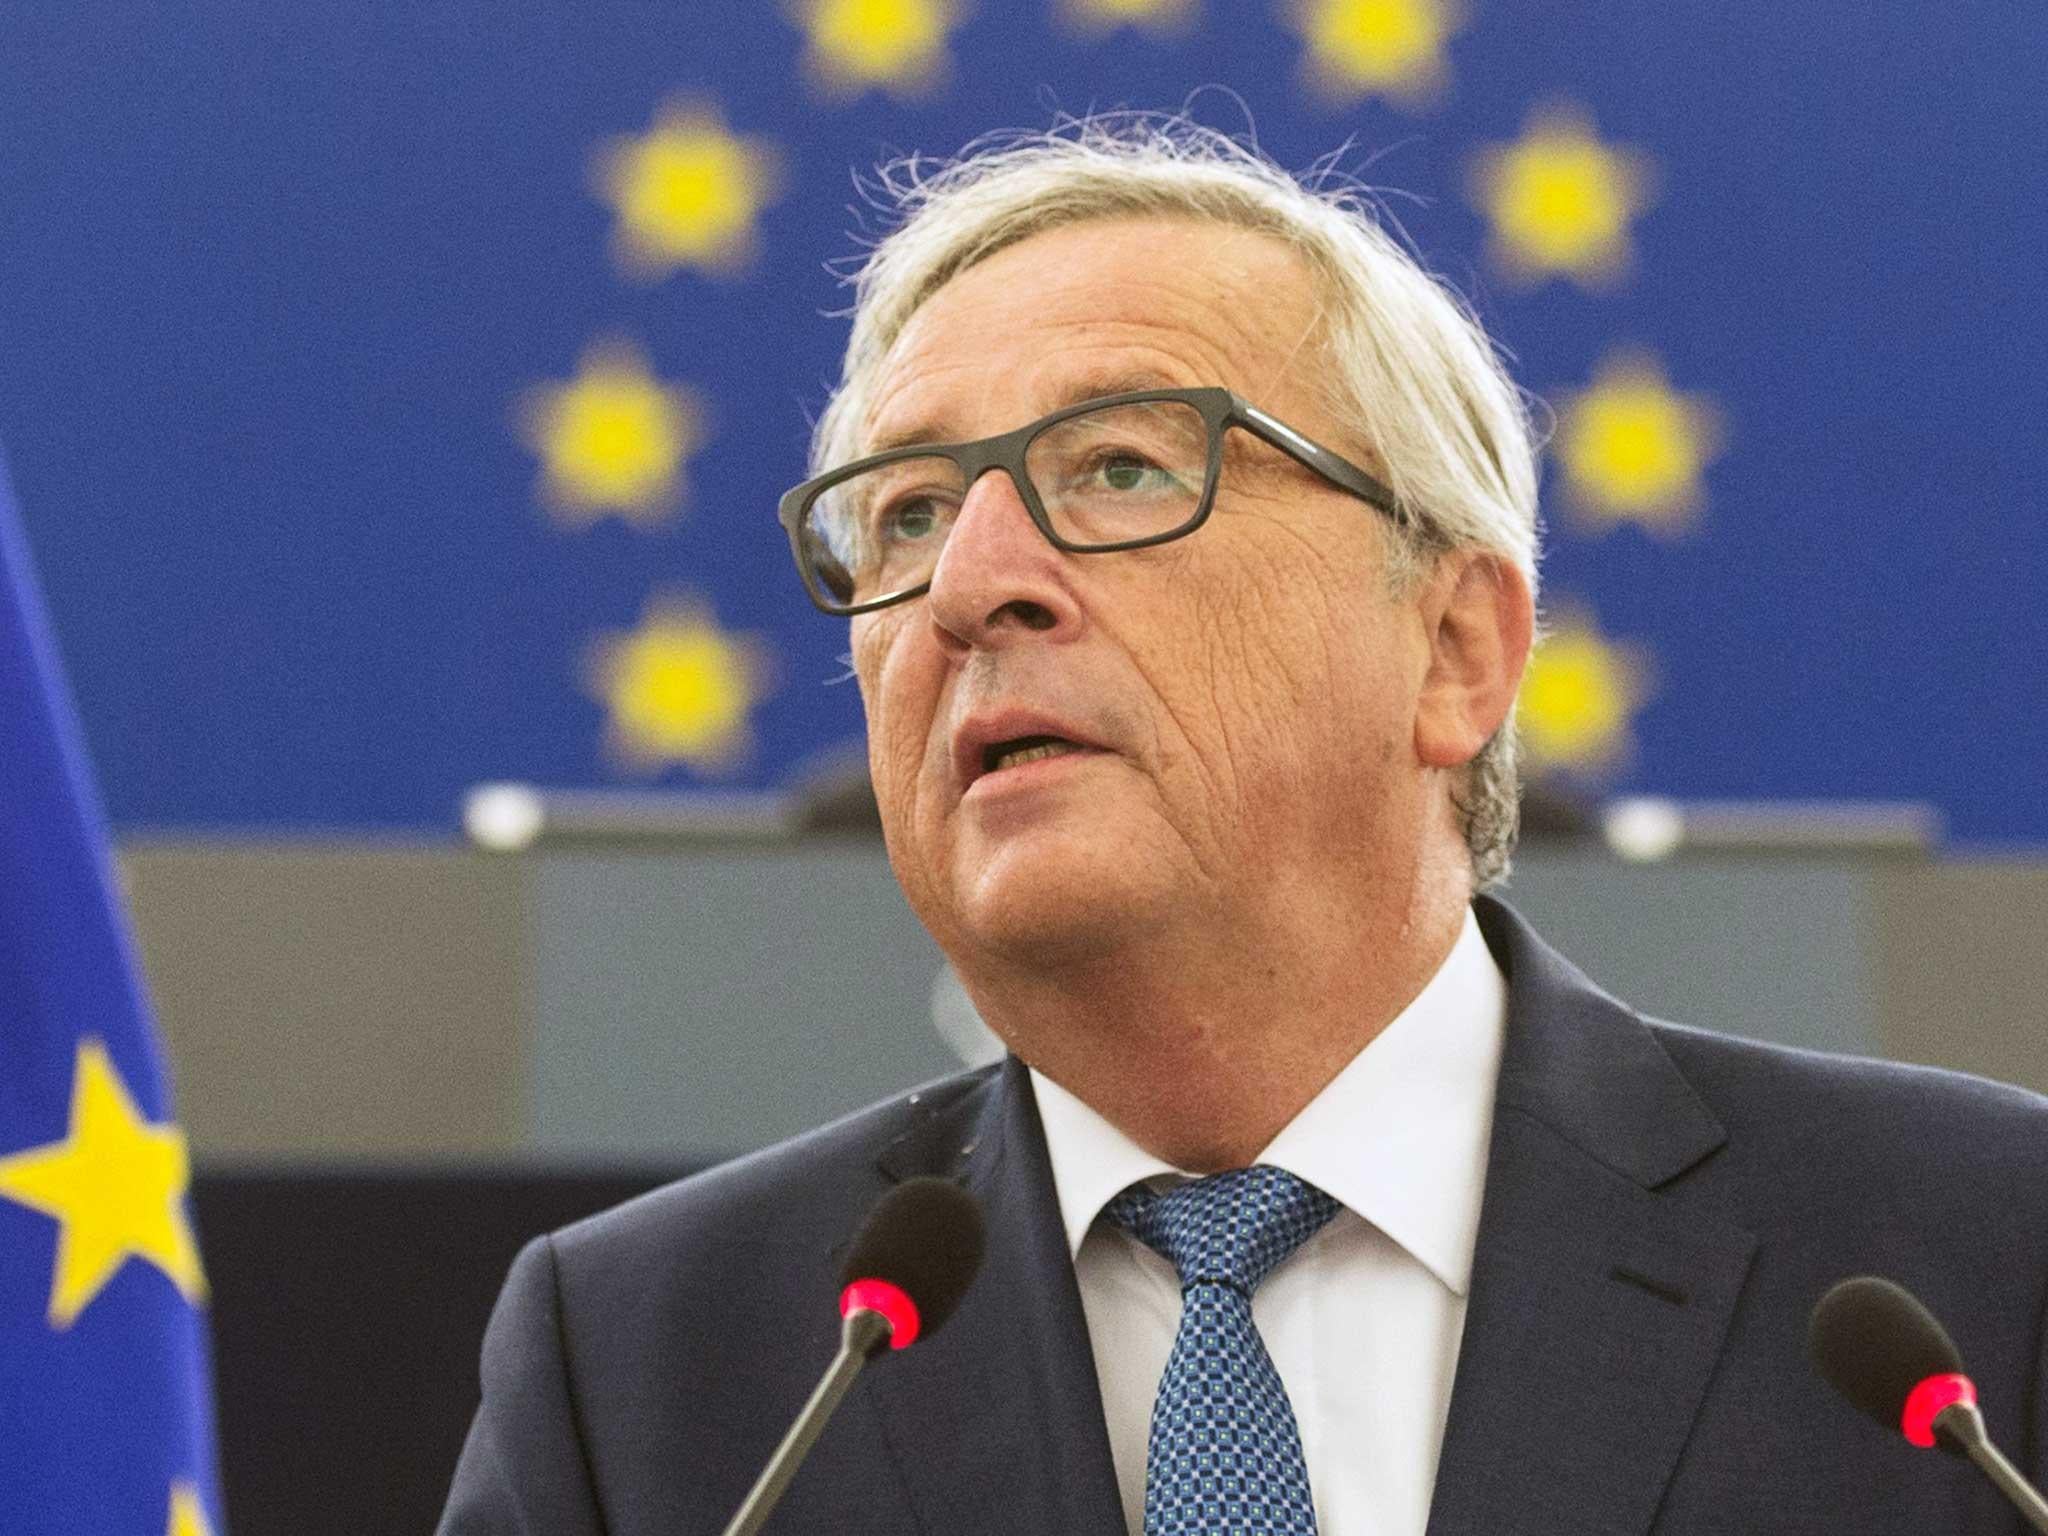 President of the European Commission Jean-Claude Juncker backed a so-called ‘Google tax’ in his annual state of the union address